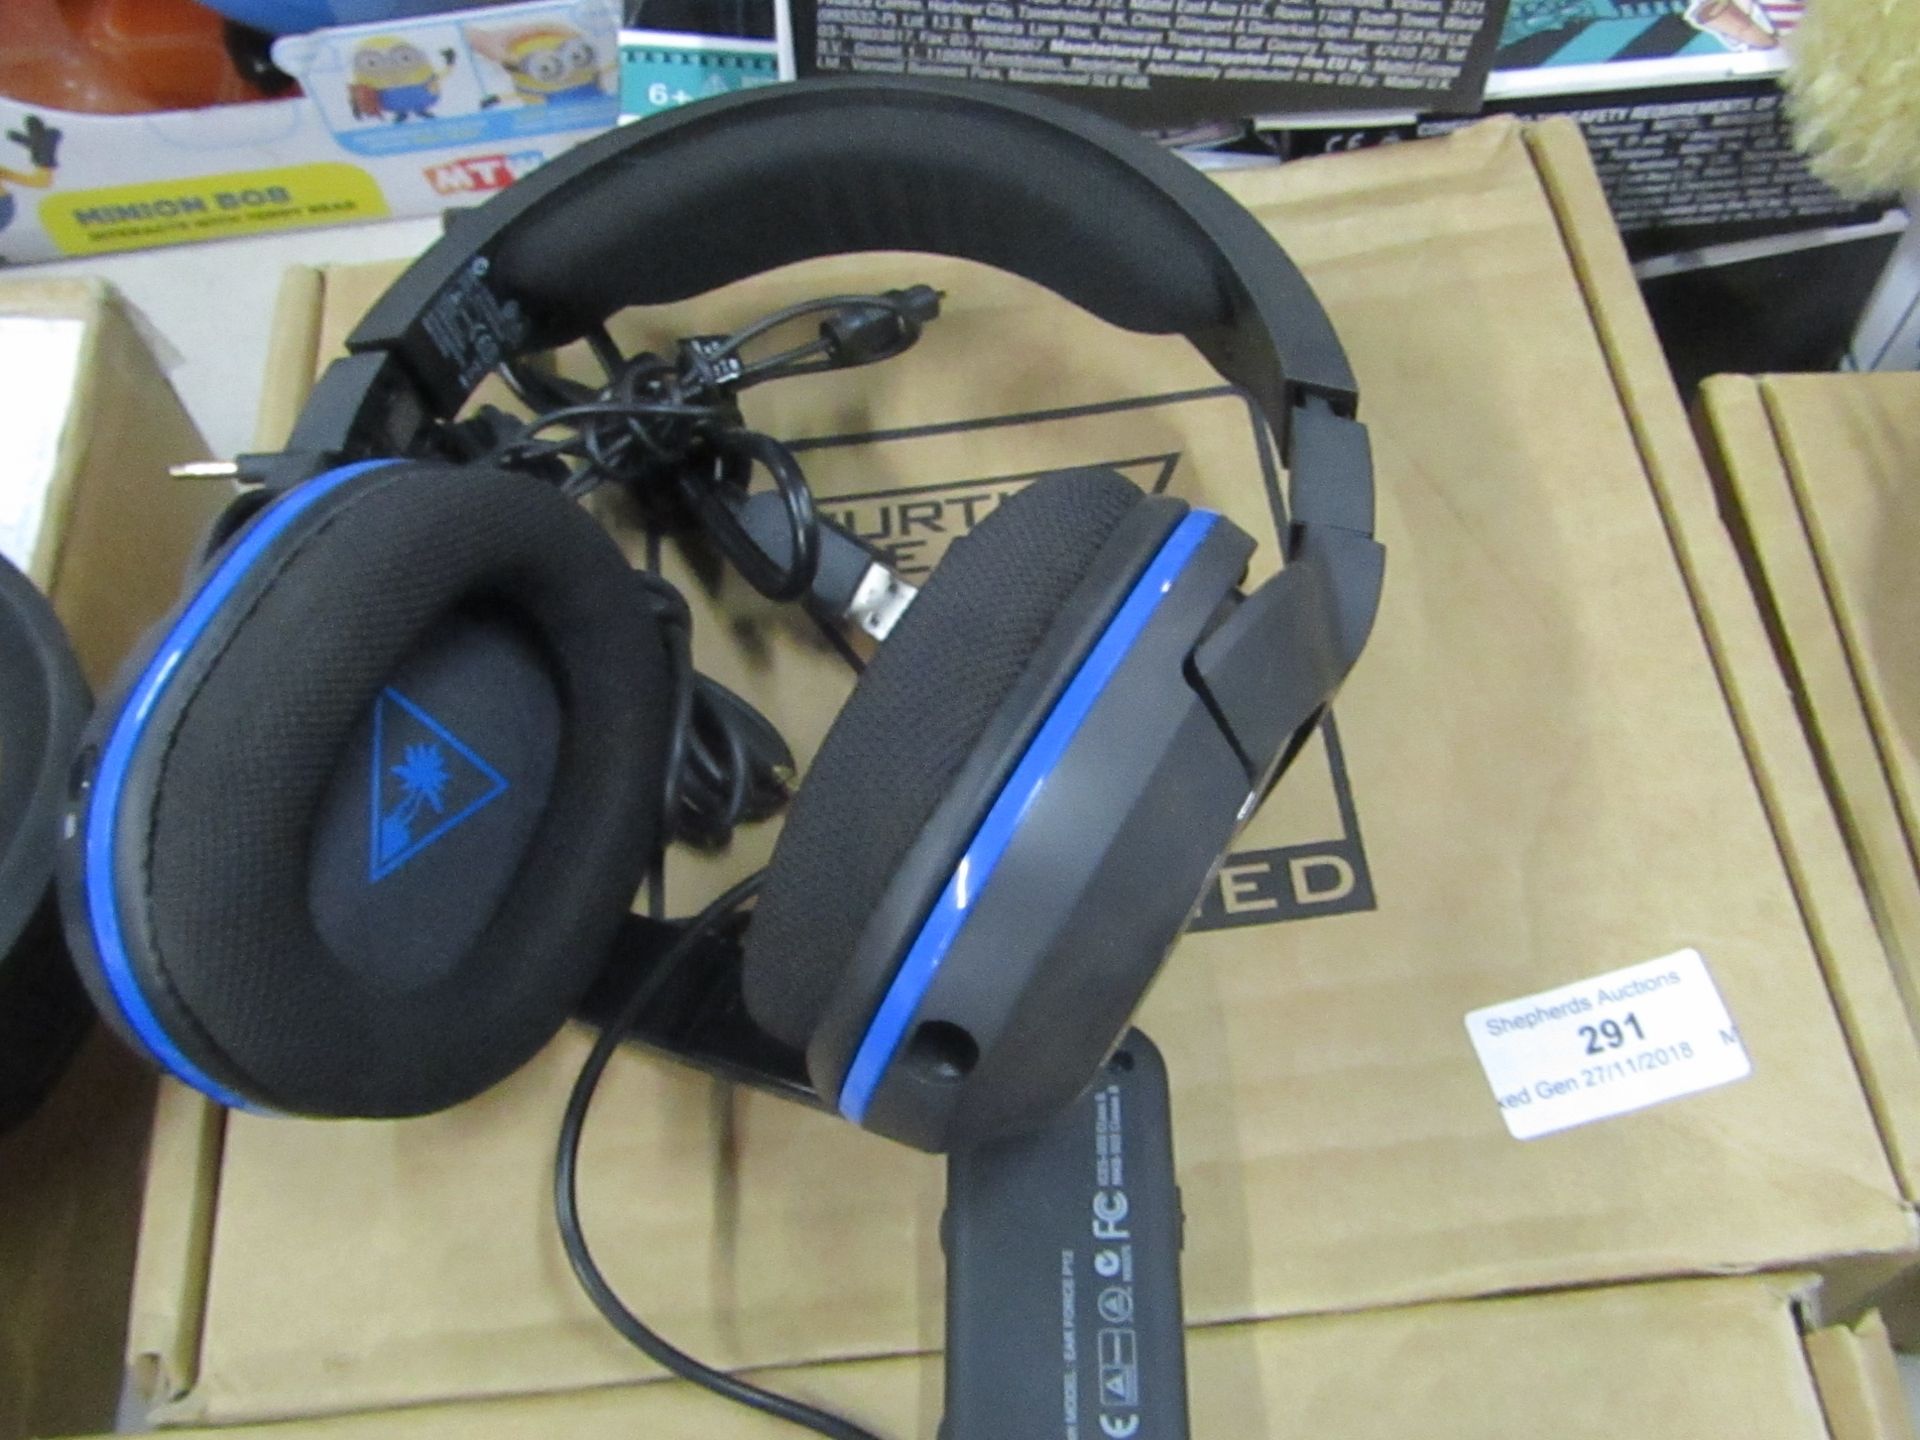 Turtle beach stealth 400 gaming headphones, boxed and unchecked